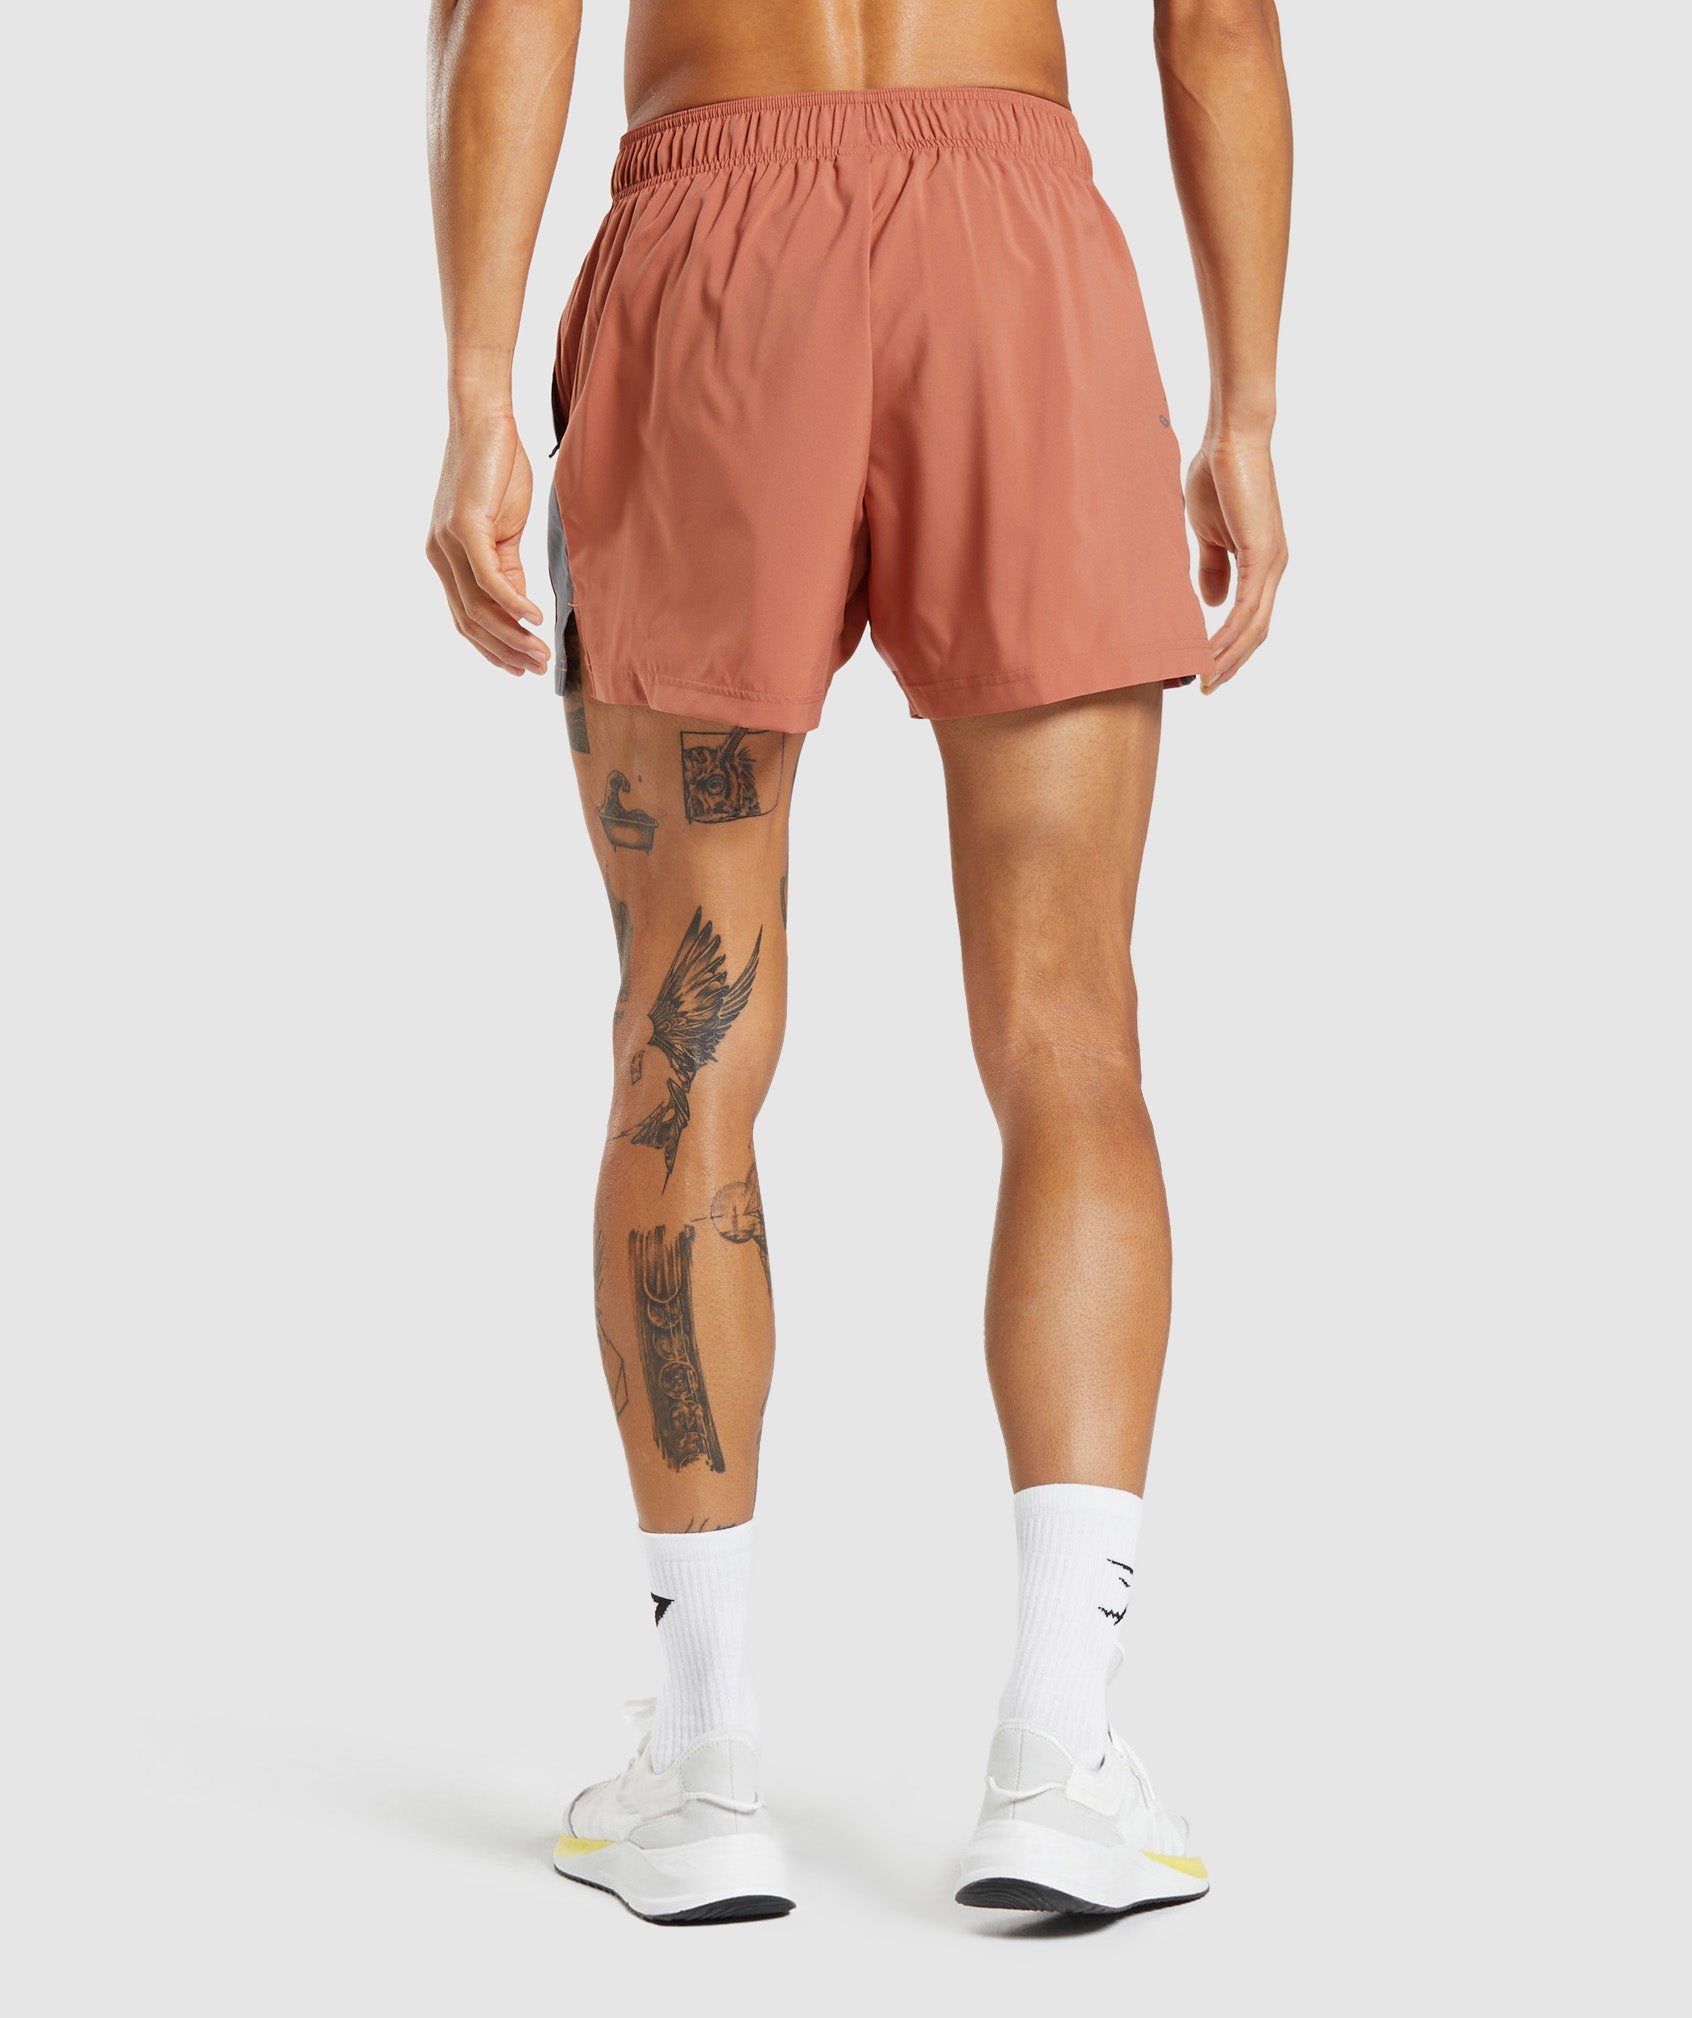 Sport 5" Shorts in Persimmon Red/Silhouette Grey